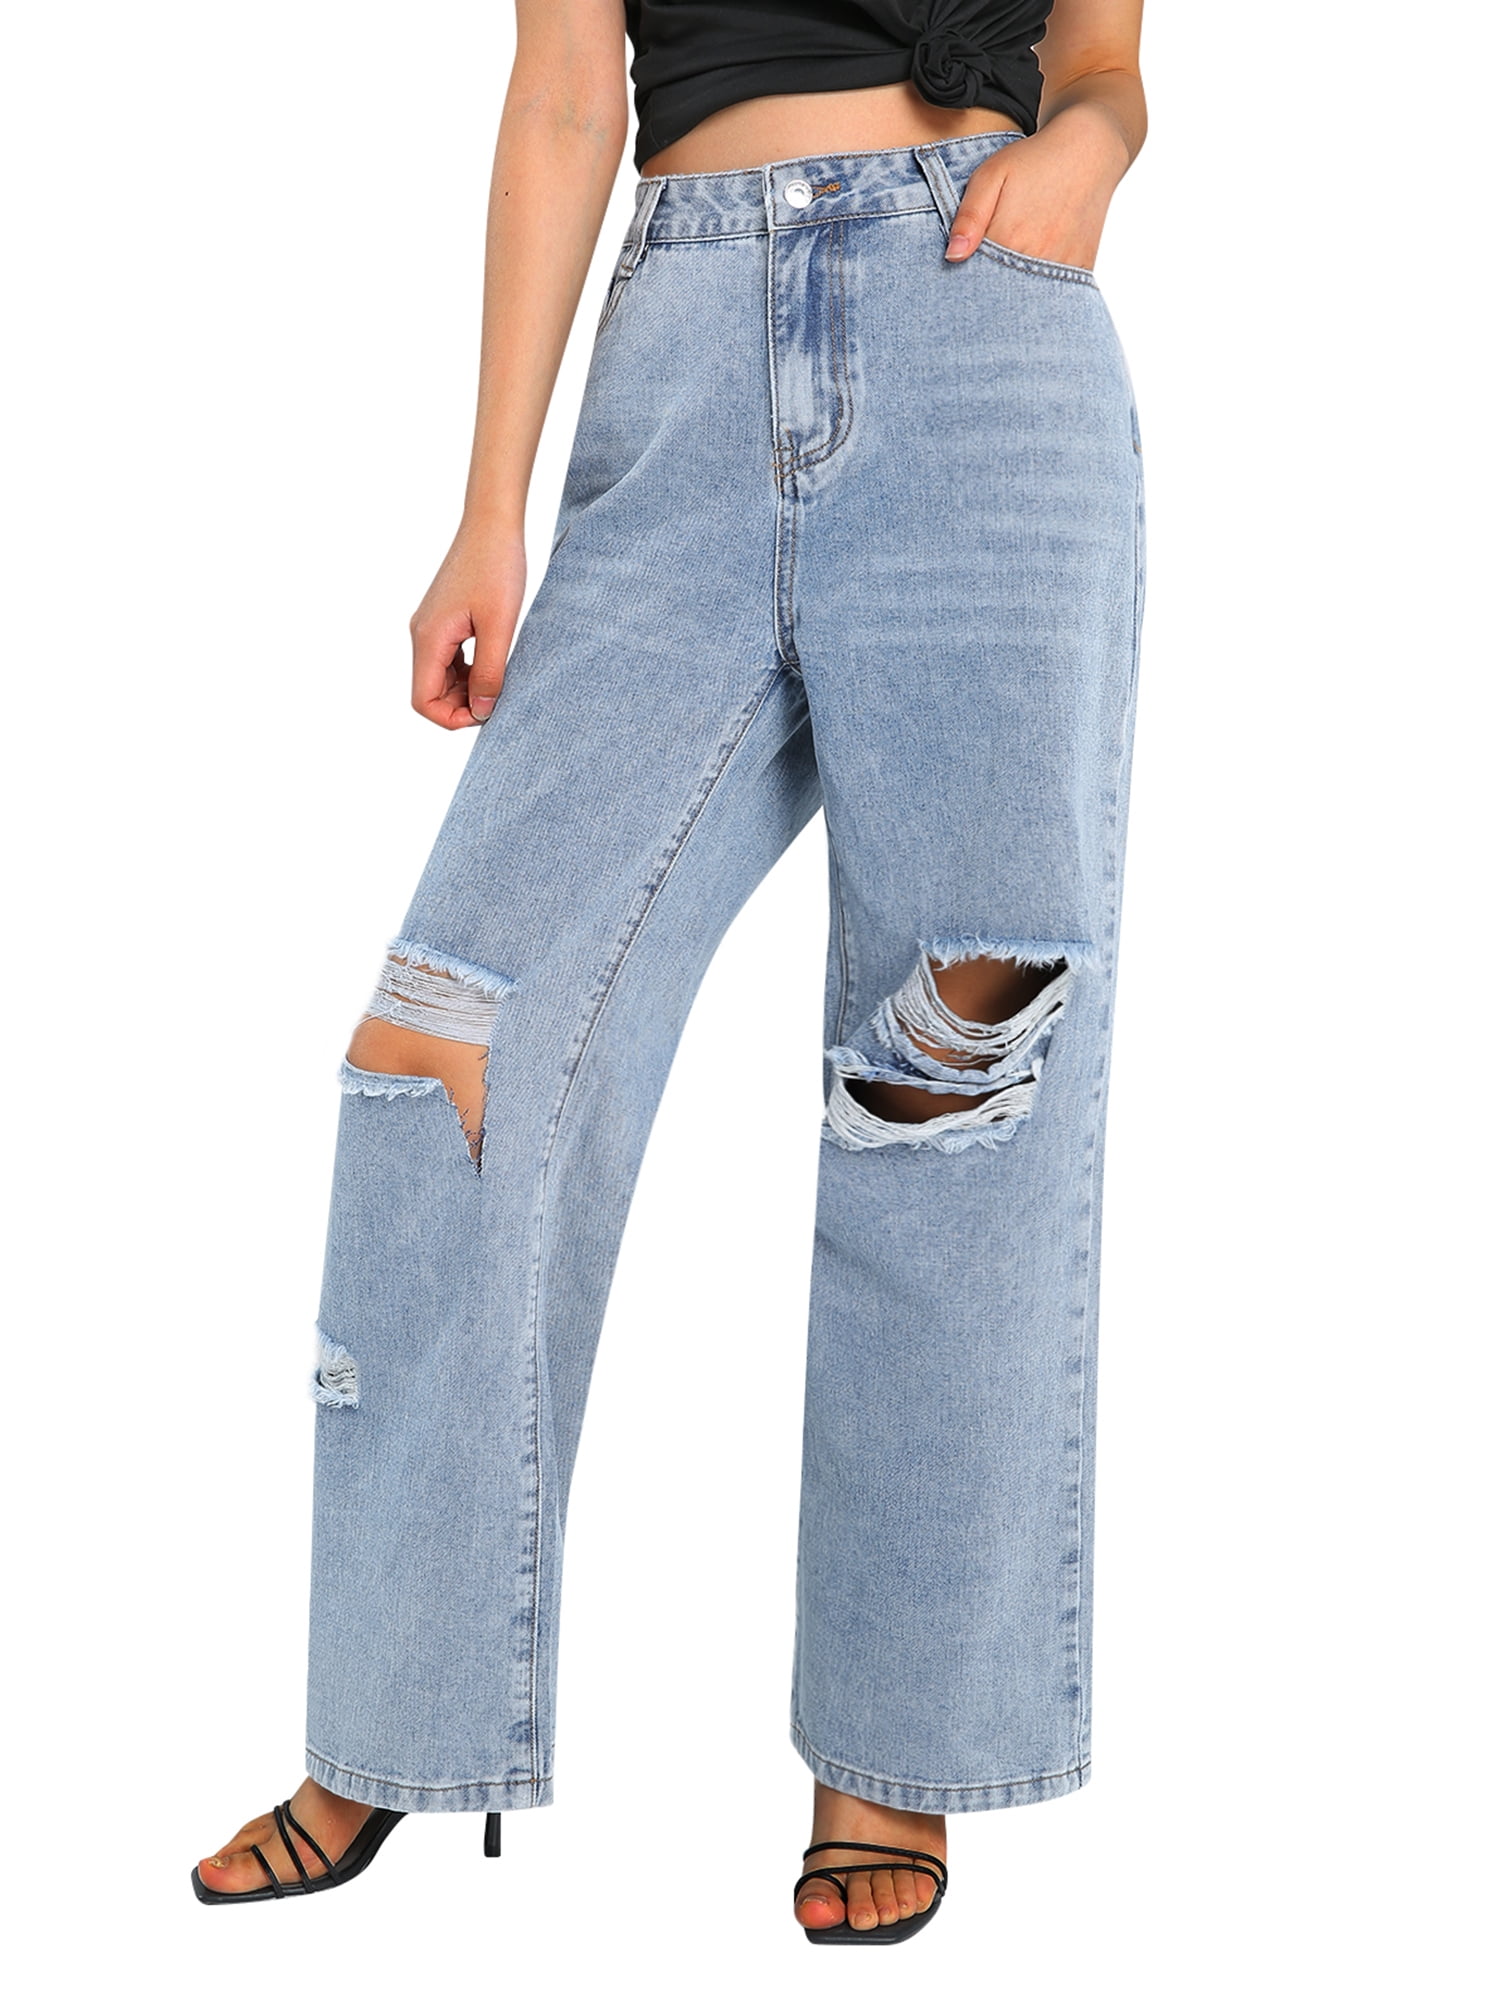 Musuos Women Y2 Baggy Jeans High Waisted Wide Leg Straight Ripped Denim ...